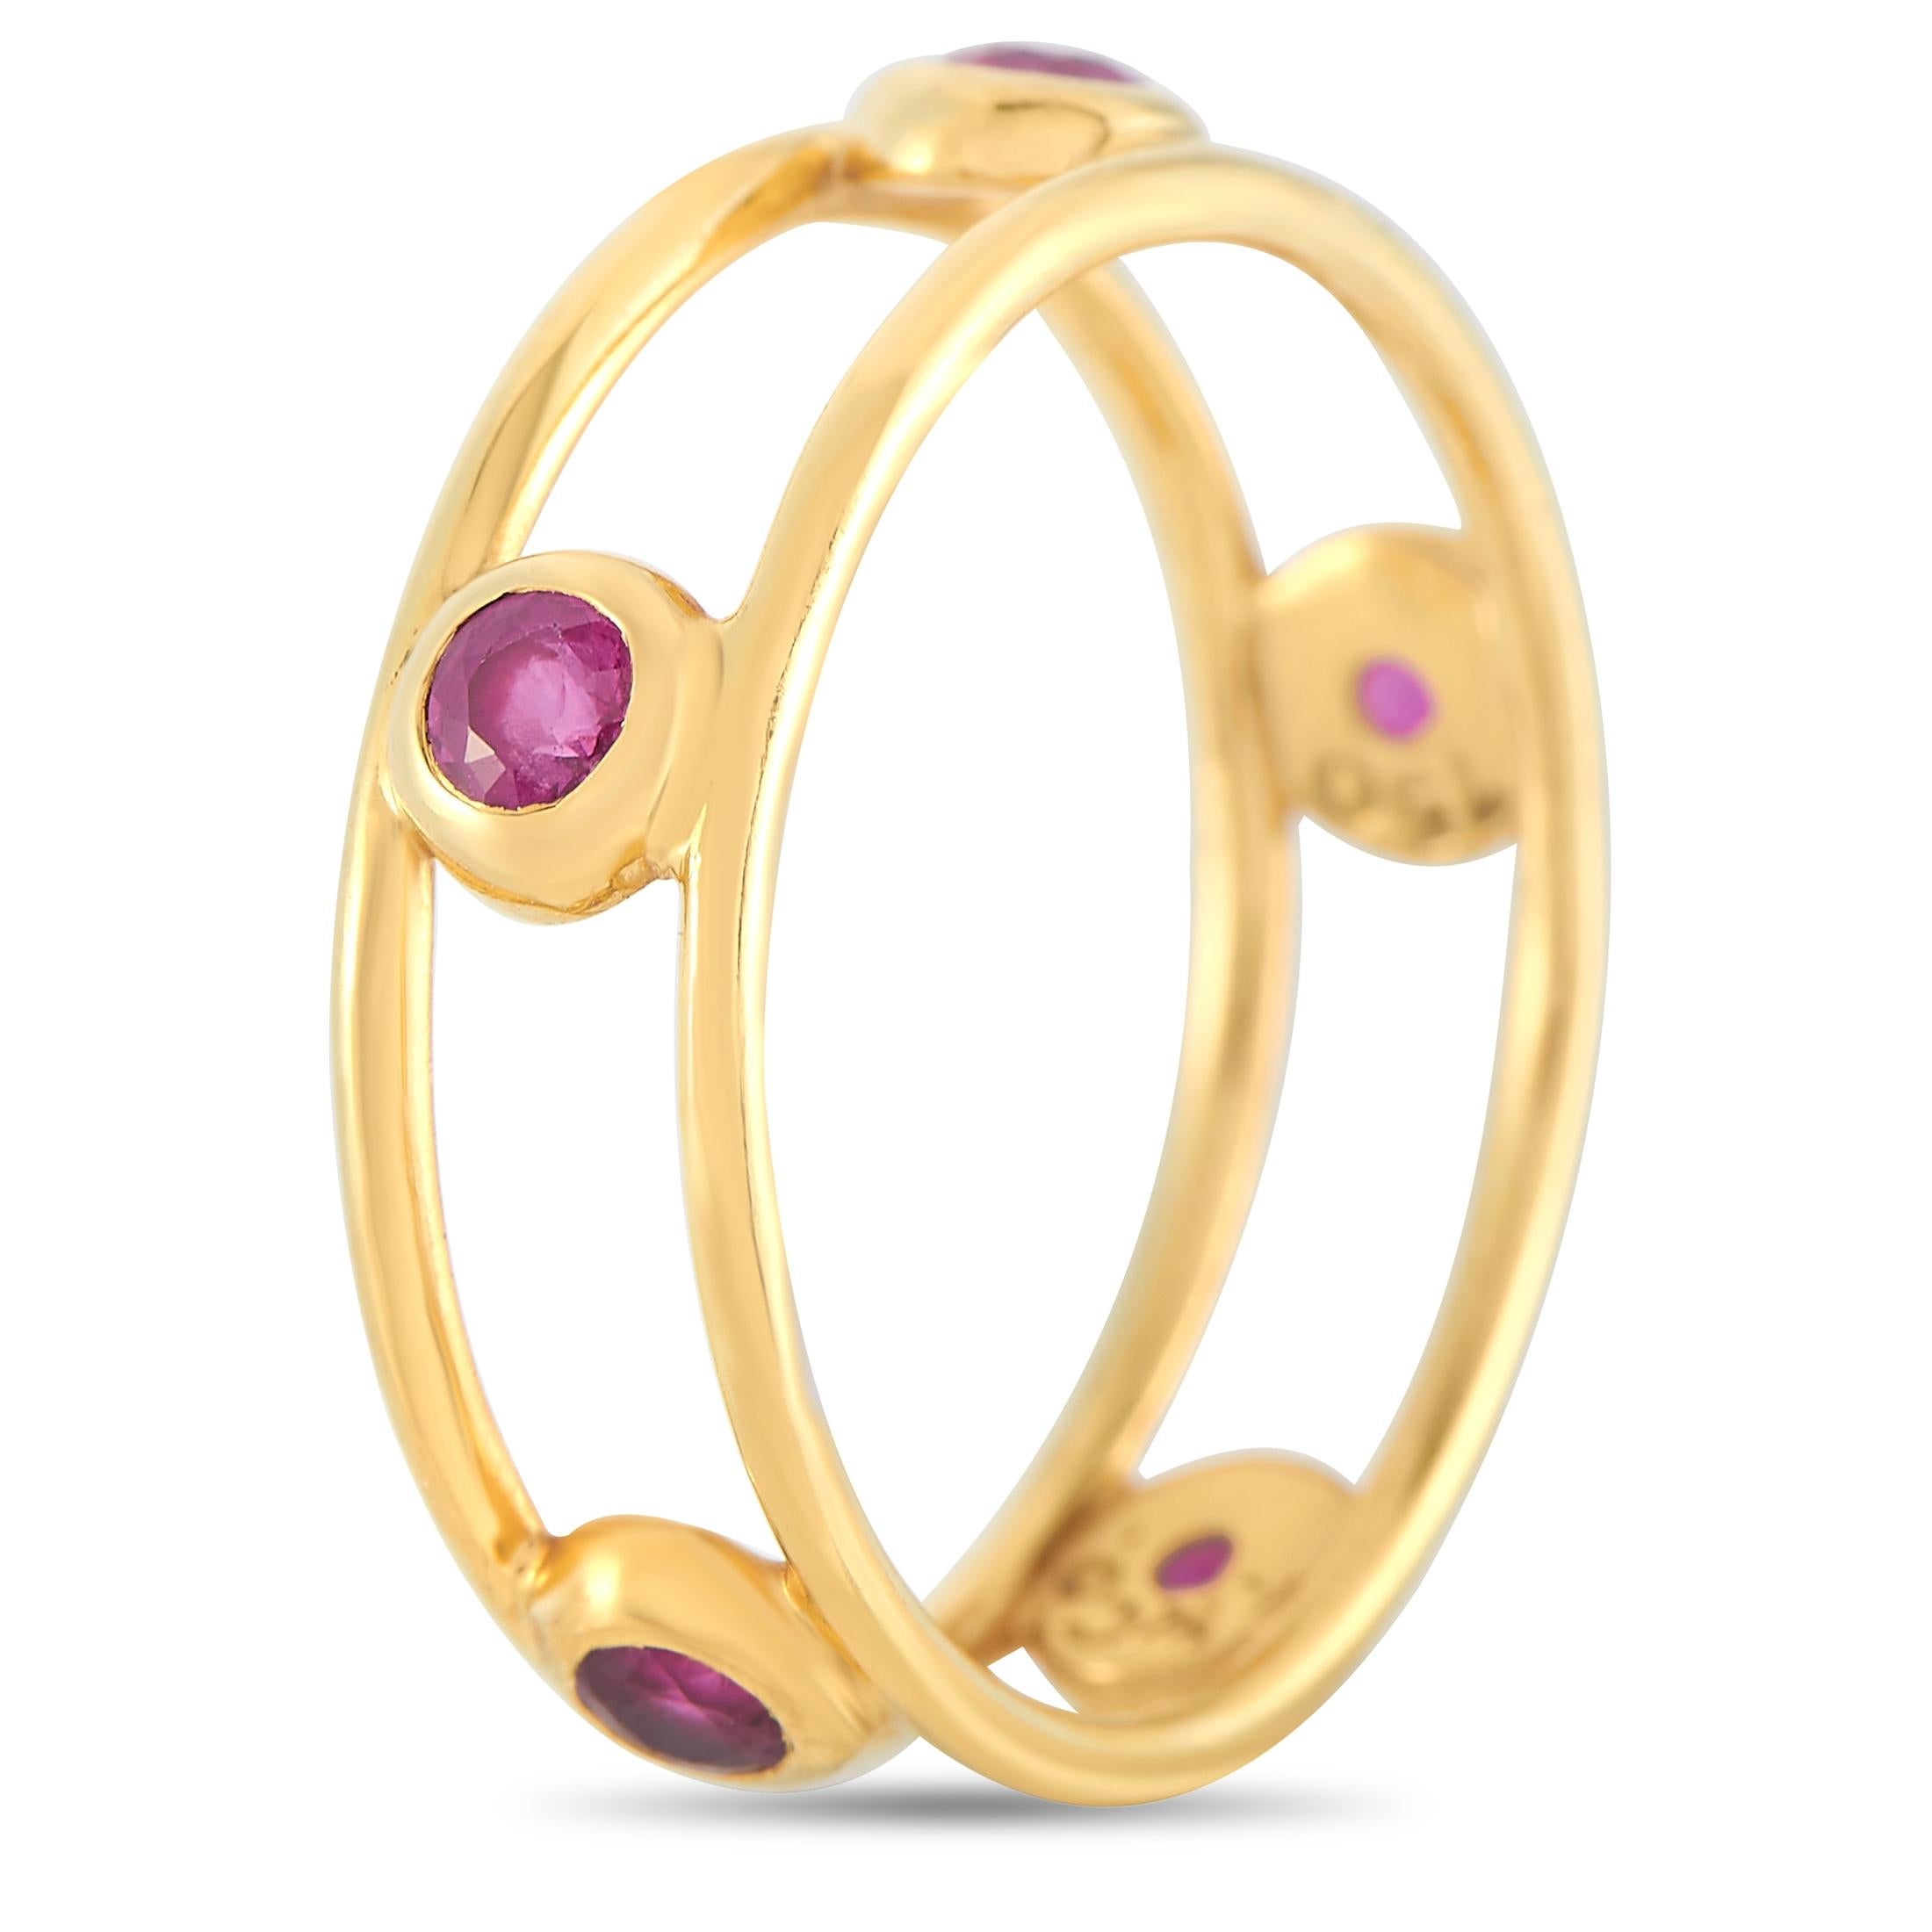 Spectacularly made with 18K yellow gold, this glamorous ring made by Tiffany & Co. is set with five ruby stones. The ring weighs 2.5 grams and boasts band thickness of 5 mm.

This jewelry piece is offered in estate condition and includes the